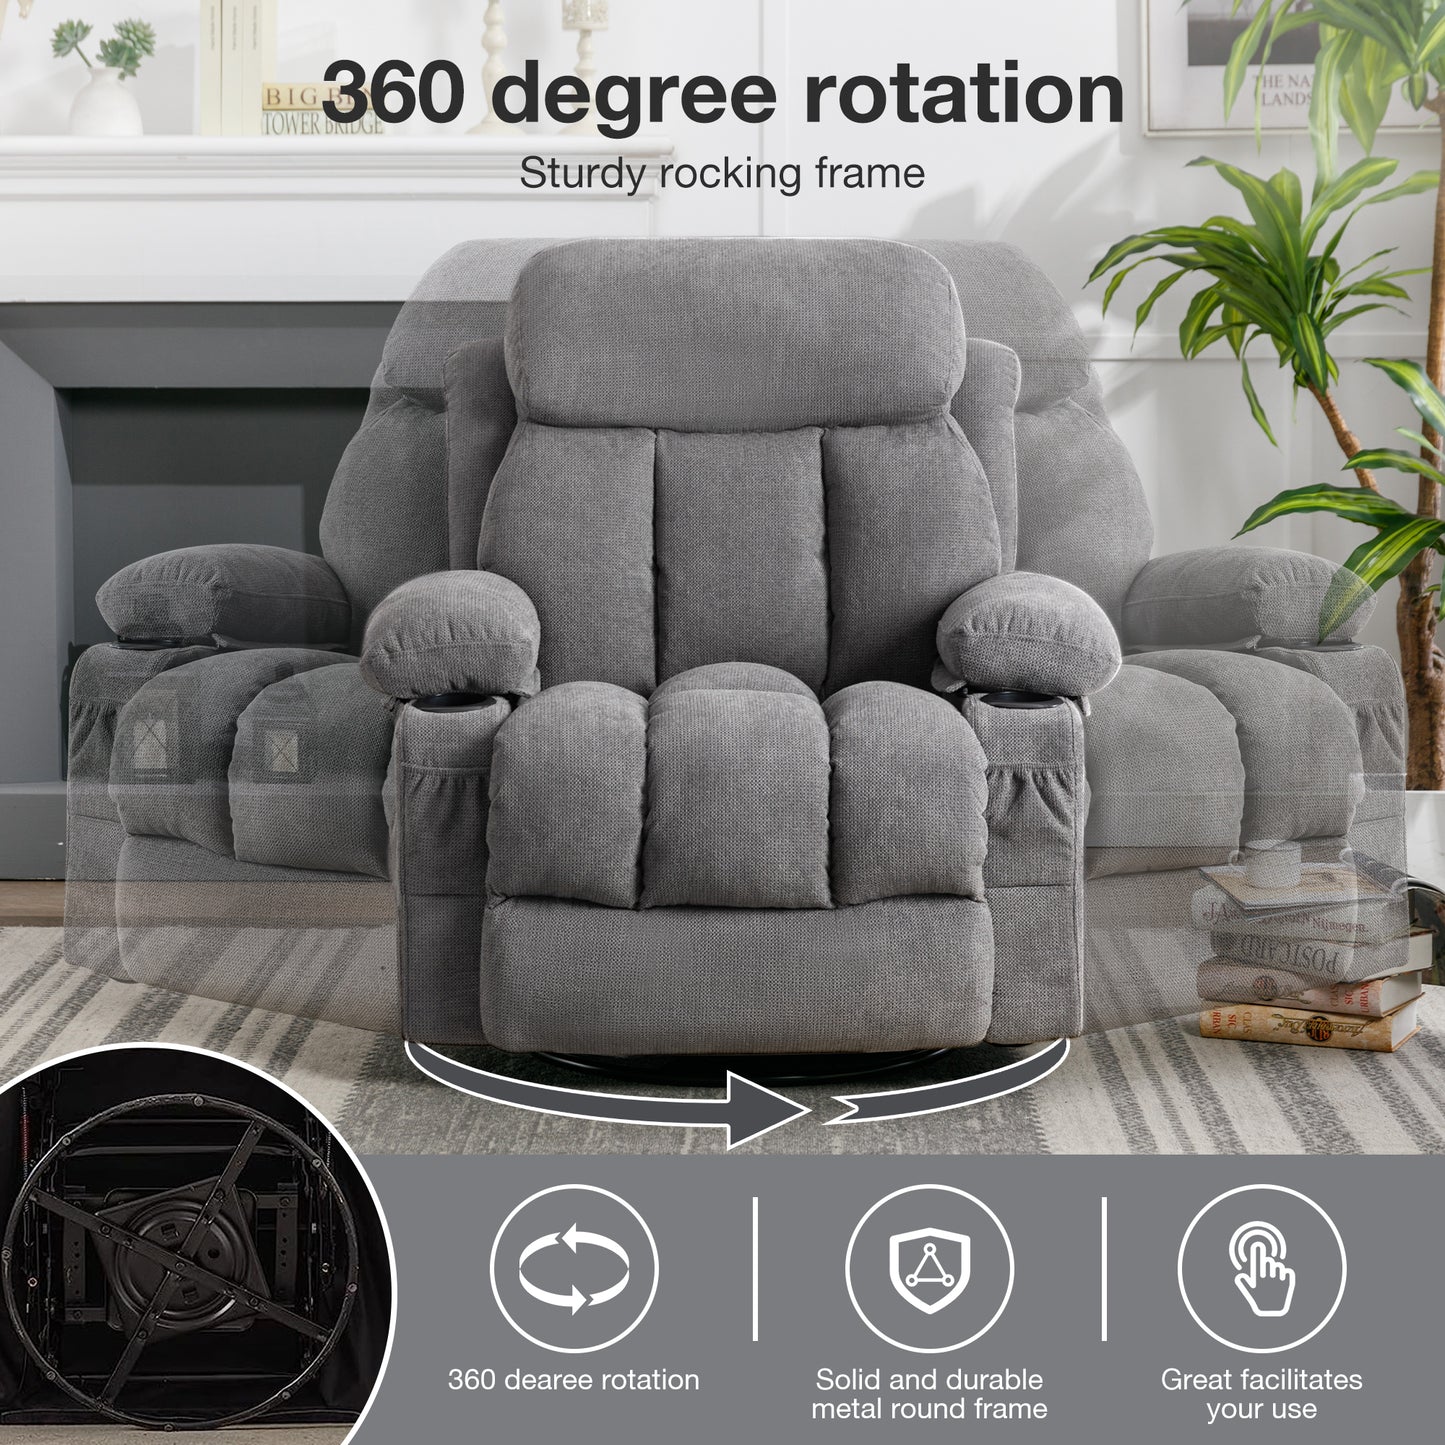 SYNGAR Recliner Chair for Elderly, Massage Chair with USB, Cup Holders and Side Pockets, Living Room Single Sofa Seat Nursery Swivel Rocker Sofa Lounge Chair, Heavy Duty Reclining Mechanism, Gray